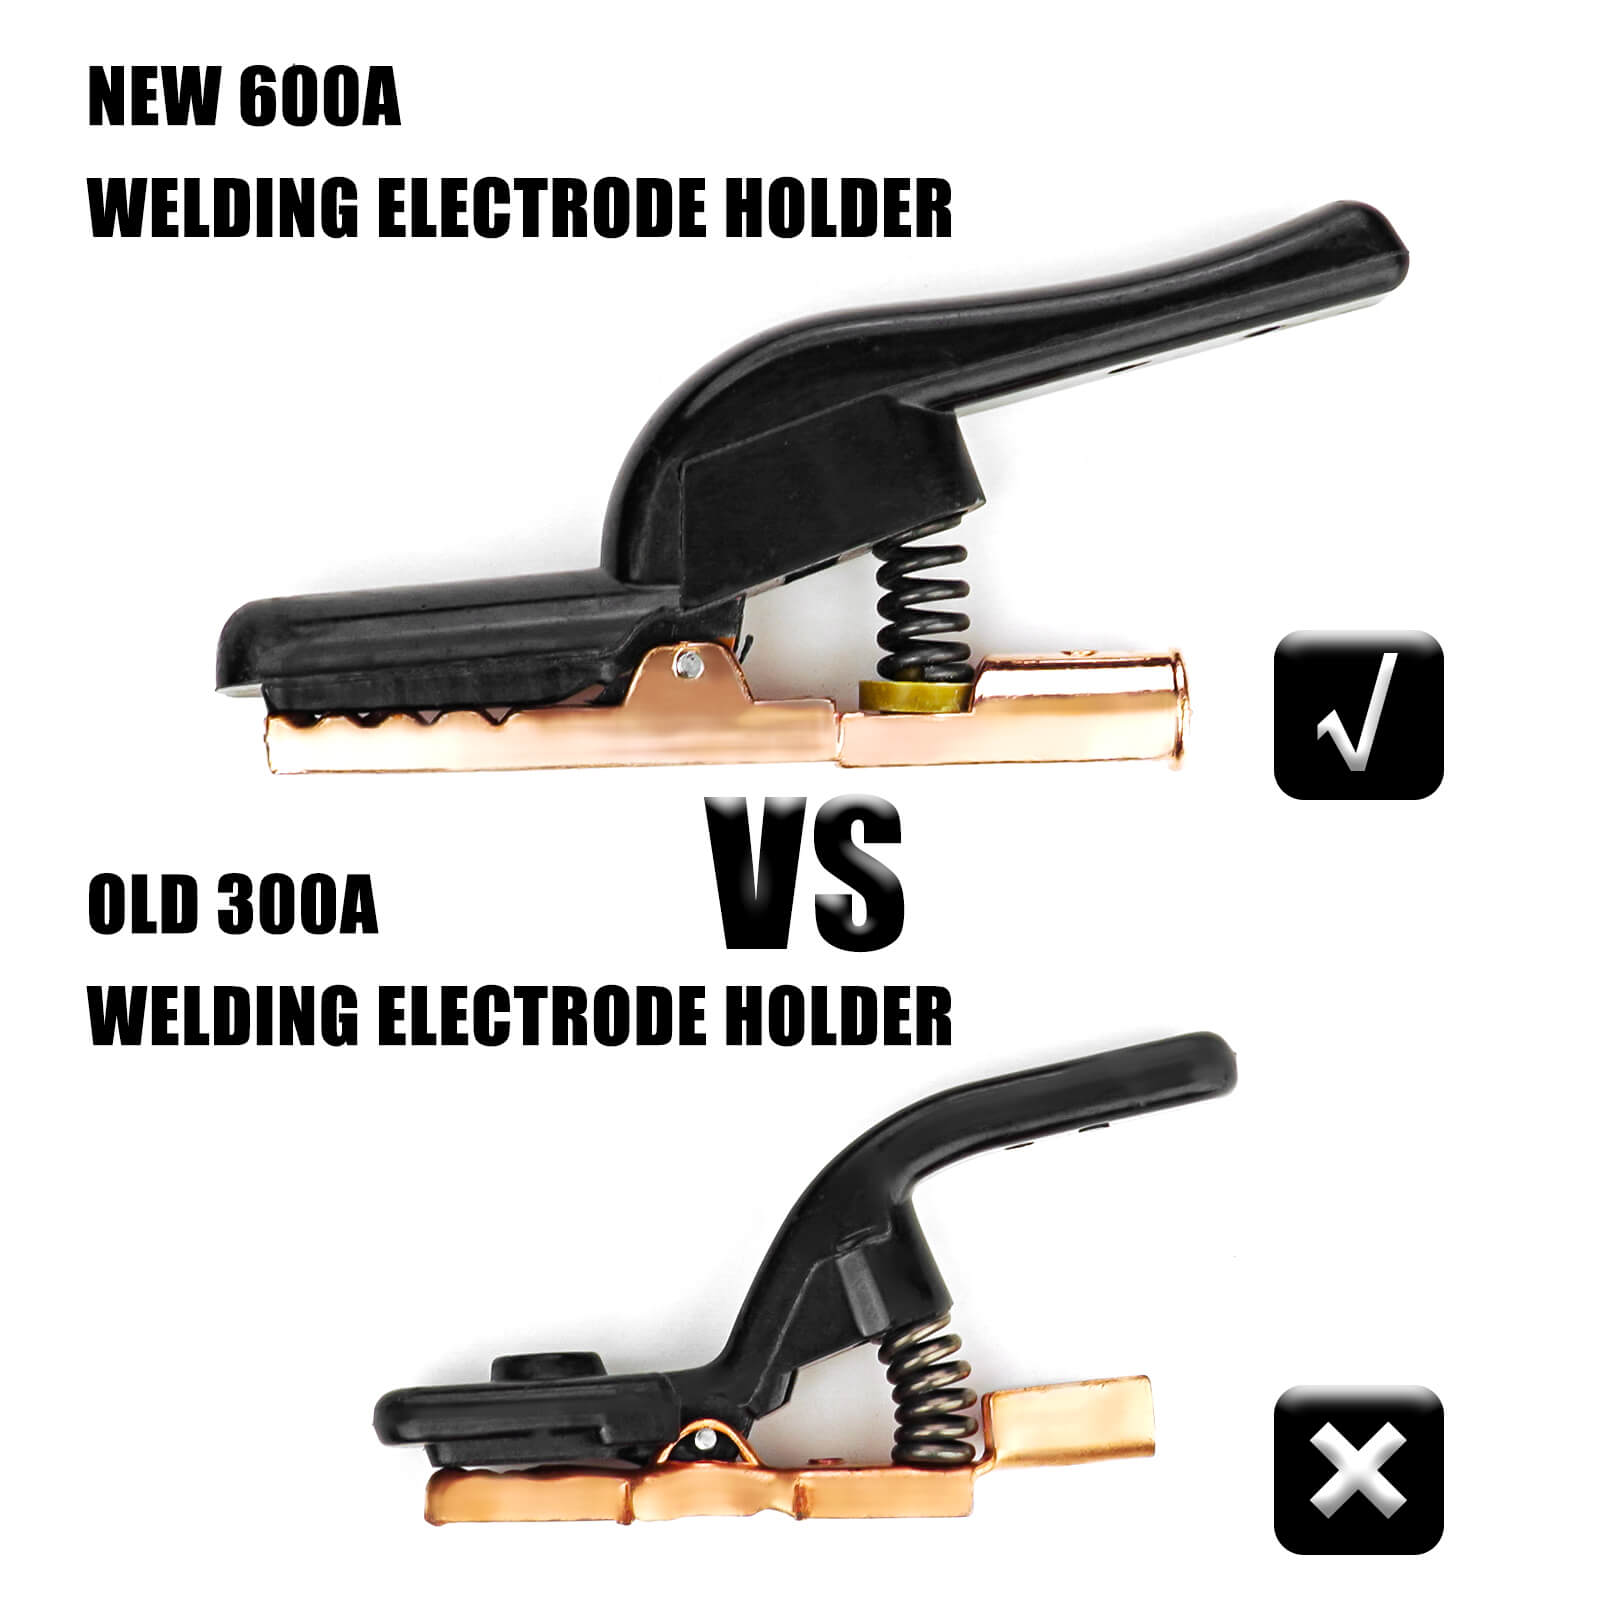 Comparison of the new heavy duty electroder holder and ground clamp pack